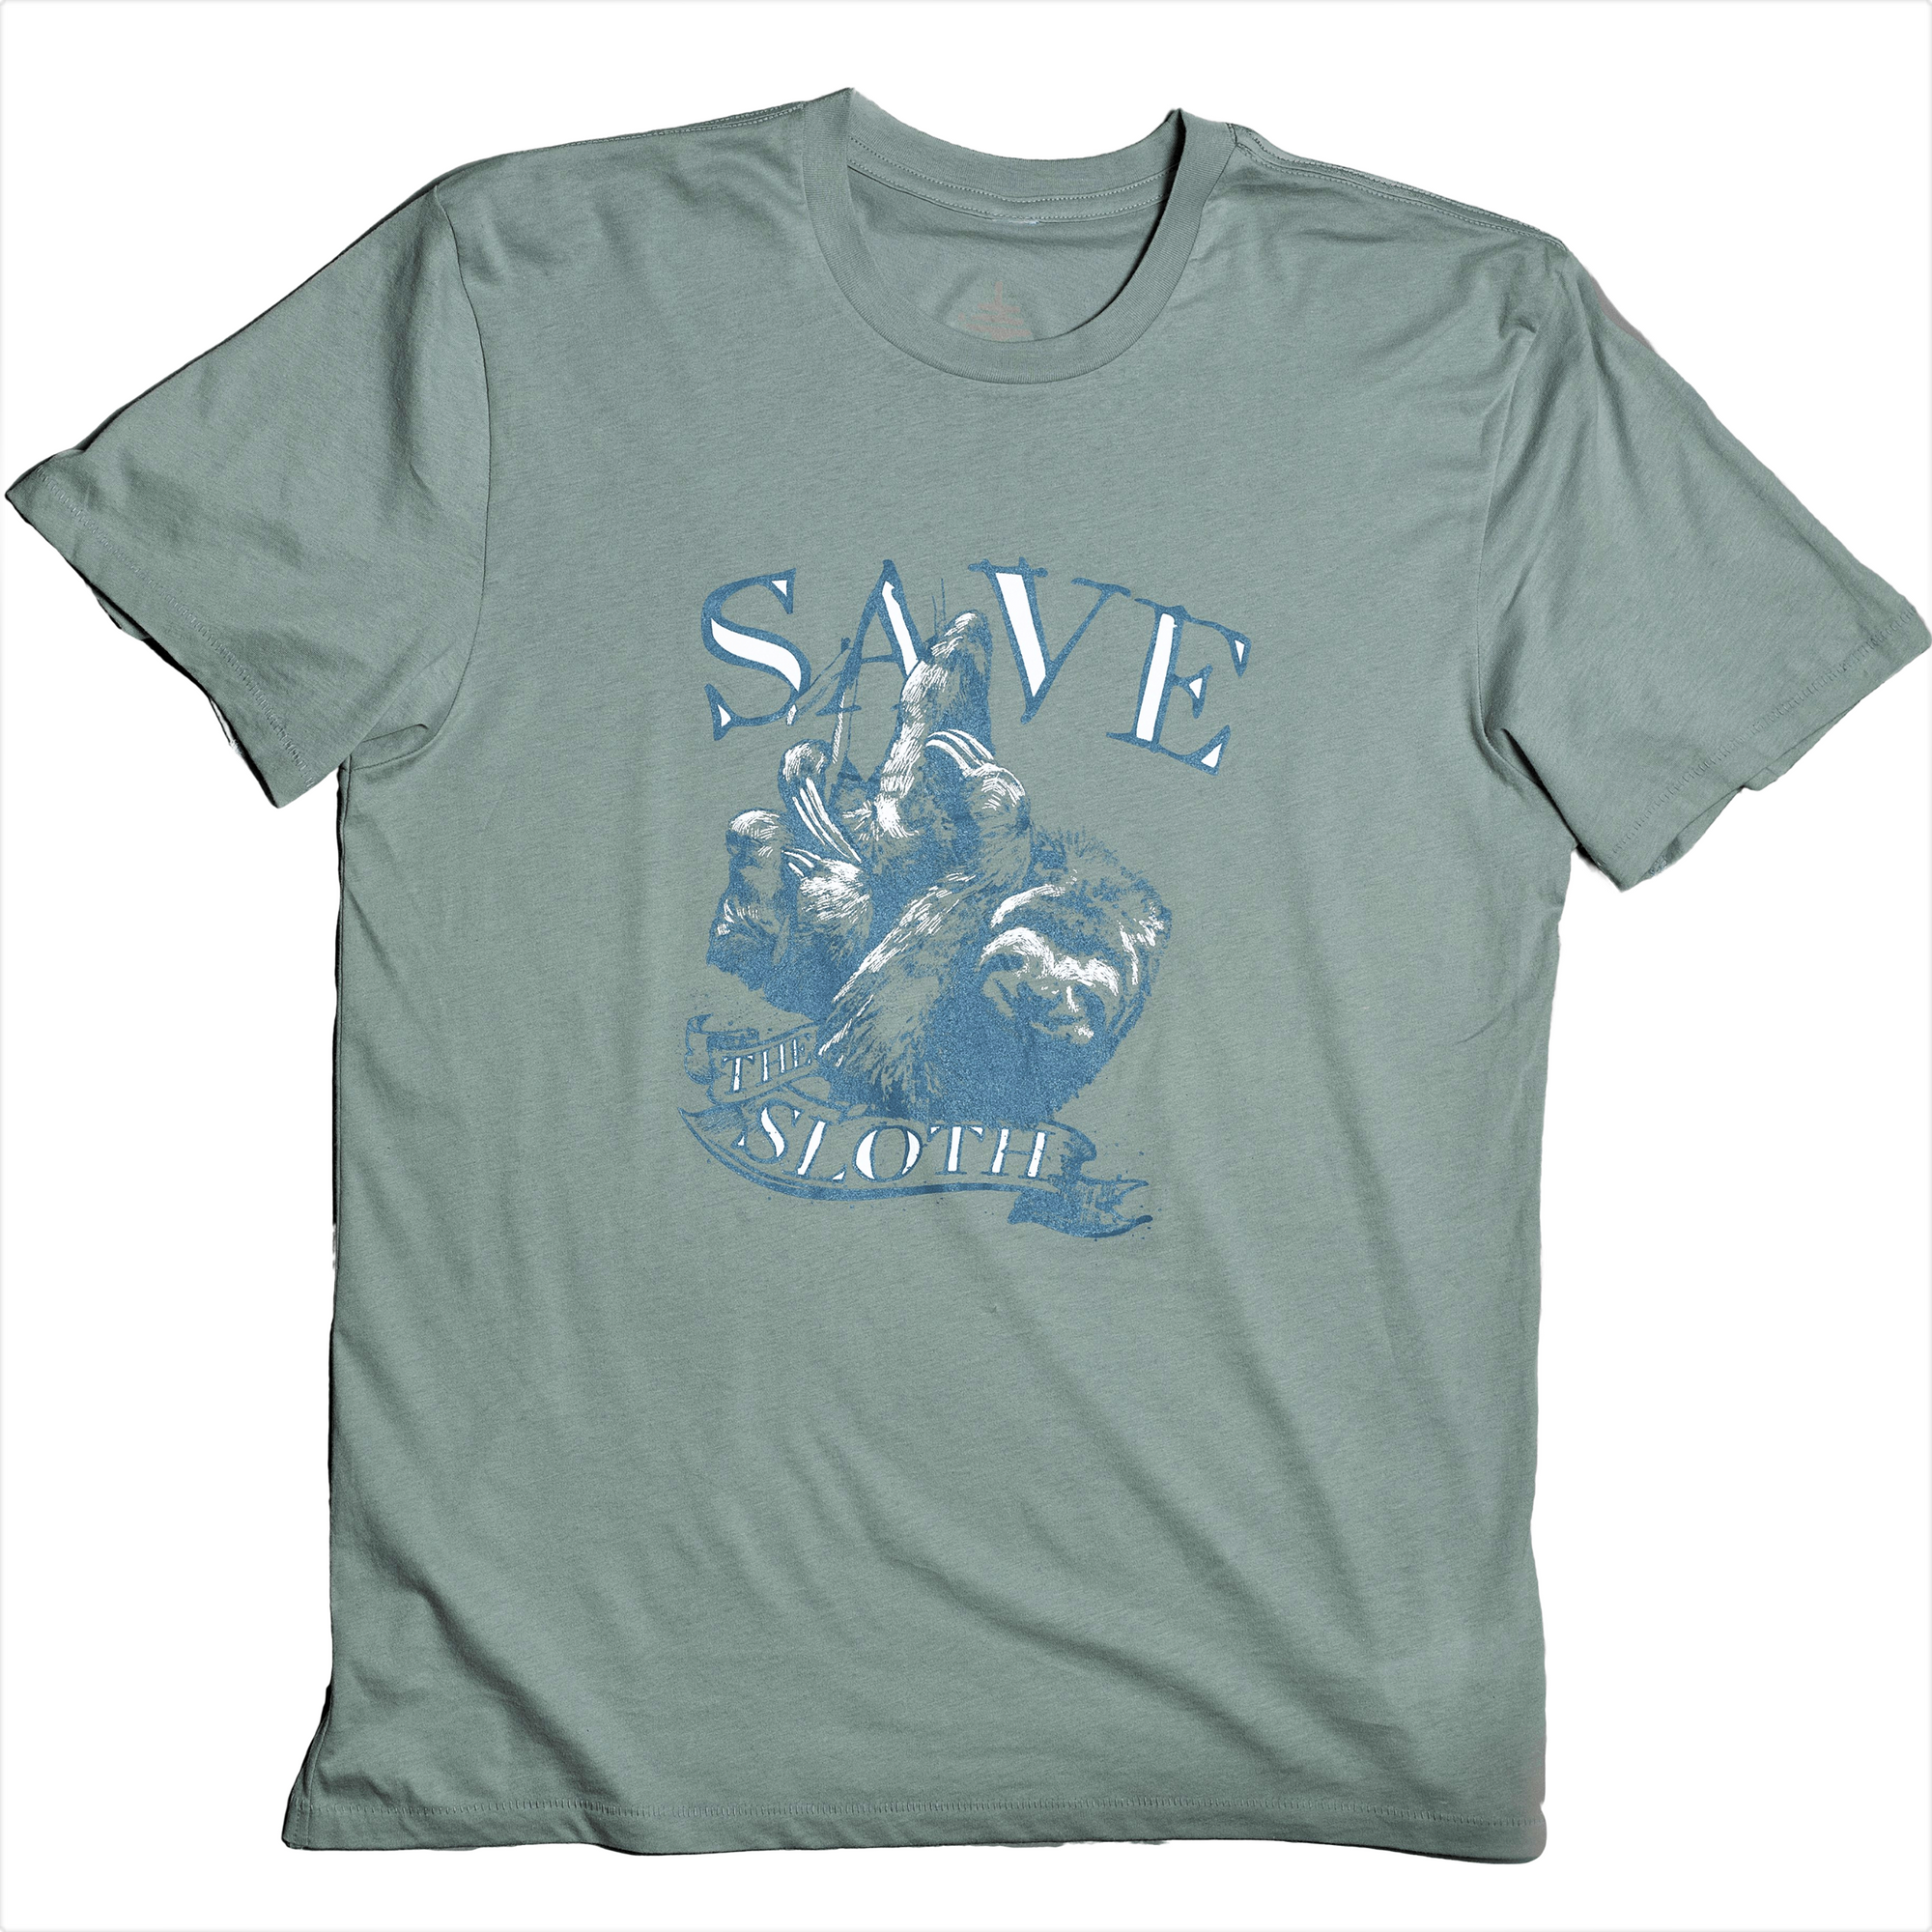 Save The Sloth - GreenHive Collective - ECO-FRIENDLY APPAREL